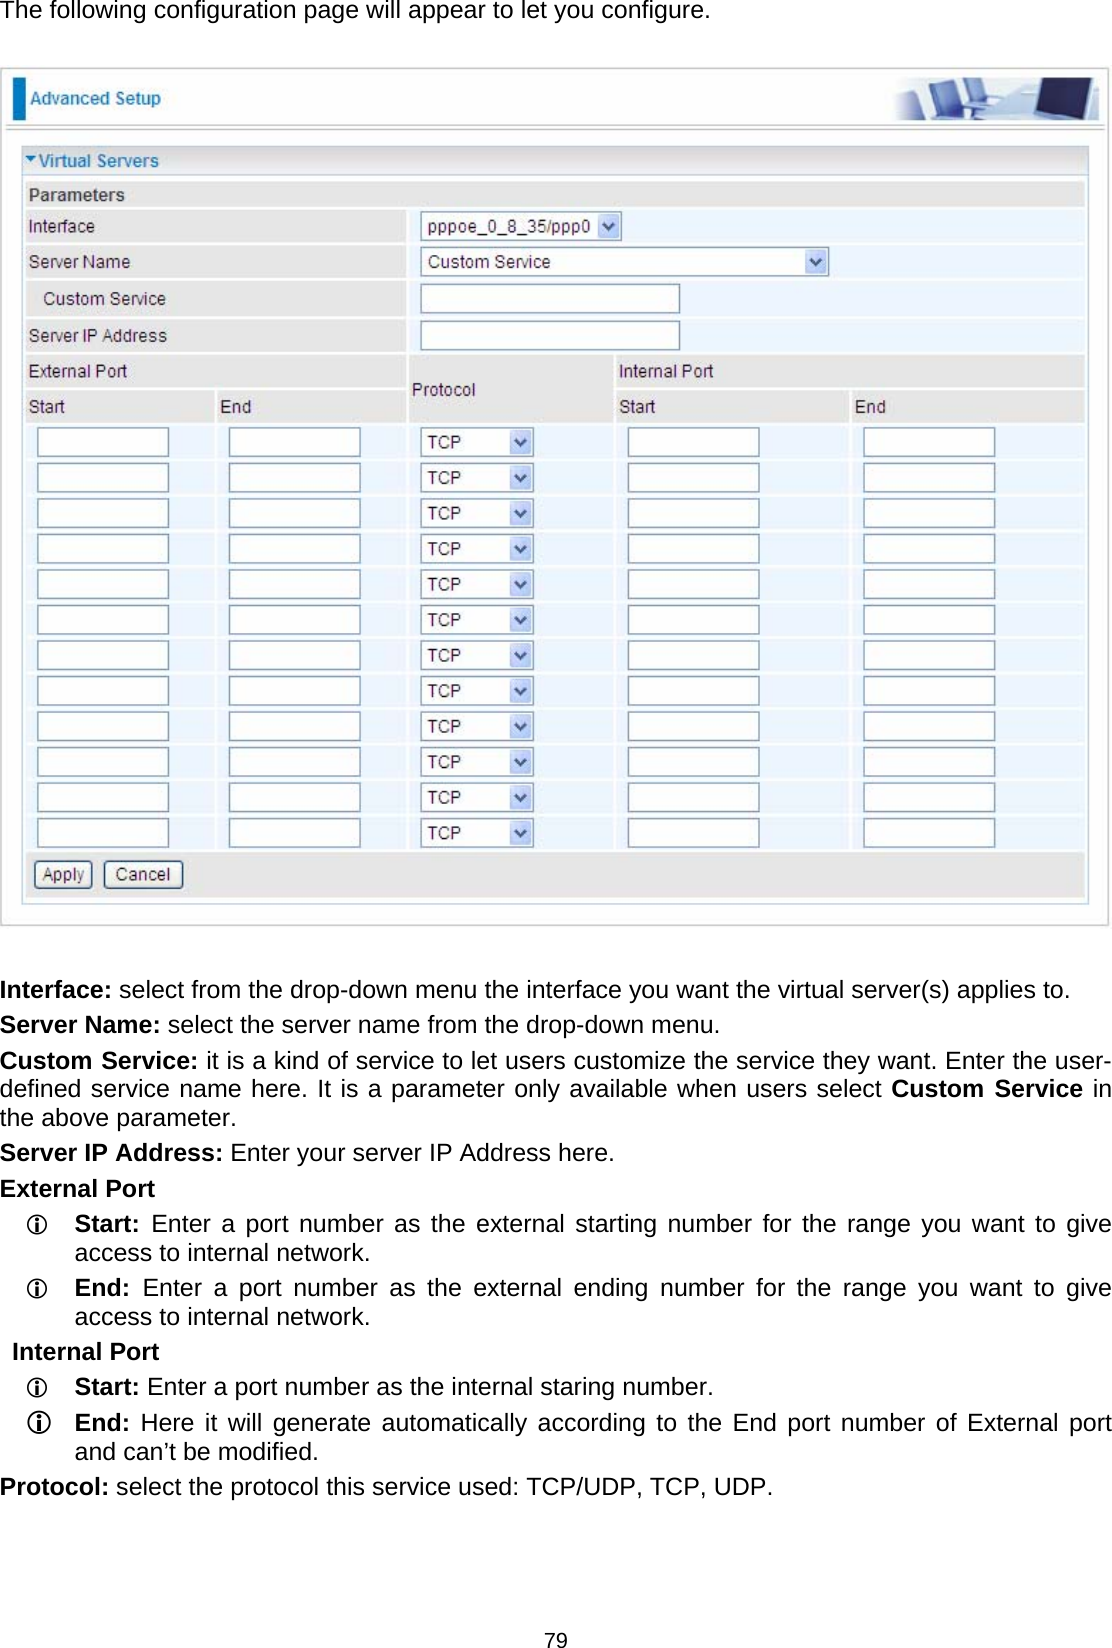  79 The following configuration page will appear to let you configure.    Interface: select from the drop-down menu the interface you want the virtual server(s) applies to. Server Name: select the server name from the drop-down menu. Custom Service: it is a kind of service to let users customize the service they want. Enter the user-defined service name here. It is a parameter only available when users select Custom Service in the above parameter. Server IP Address: Enter your server IP Address here. External Port L Start:  Enter a port number as the external starting number for the range you want to give access to internal network. L End:  Enter a port number as the external ending number for the range you want to give access to internal network. Internal Port L Start: Enter a port number as the internal staring number. L End: Here it will generate automatically according to the End port number of External port and can’t be modified. Protocol: select the protocol this service used: TCP/UDP, TCP, UDP.   